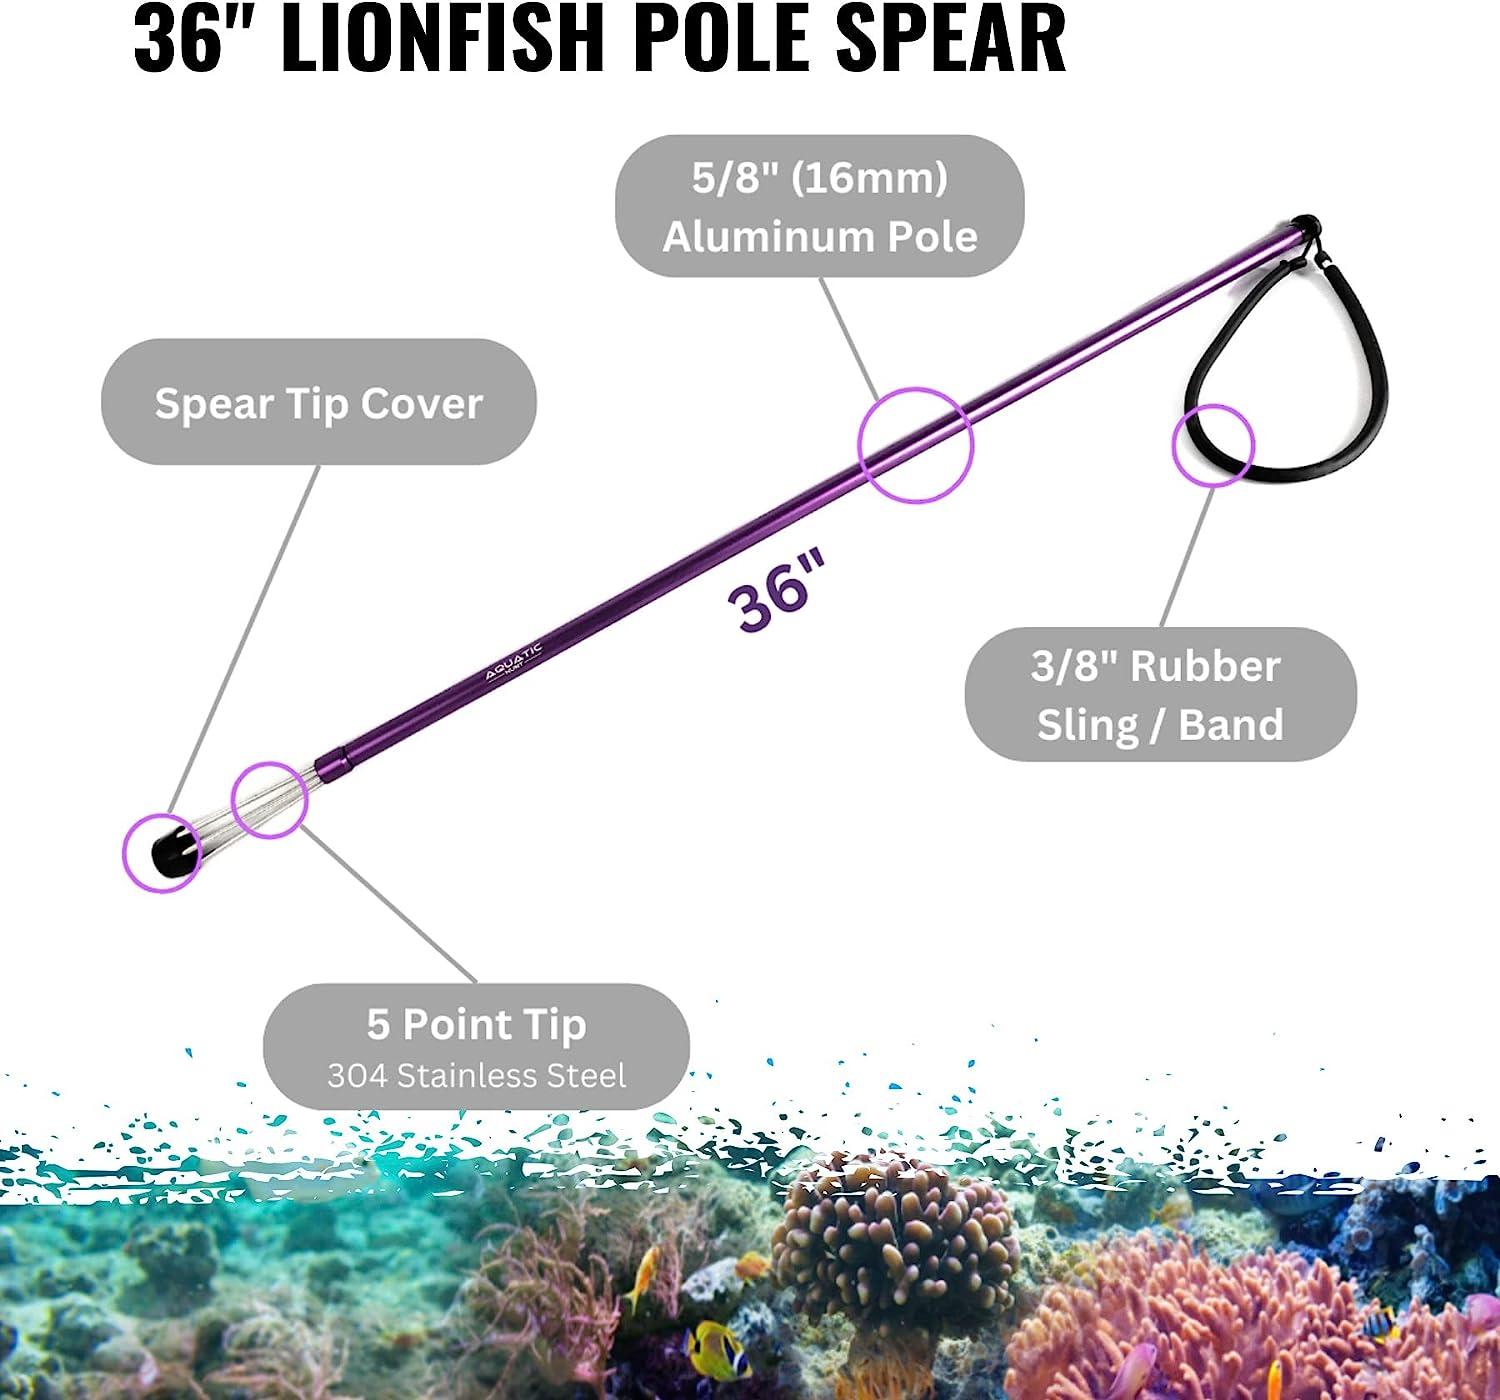 Aquatic Hunt - Spearfishing Diving Lionfish 36” (92cm) Pole Spear with 5  Point Non-Barbed Tip with Sling